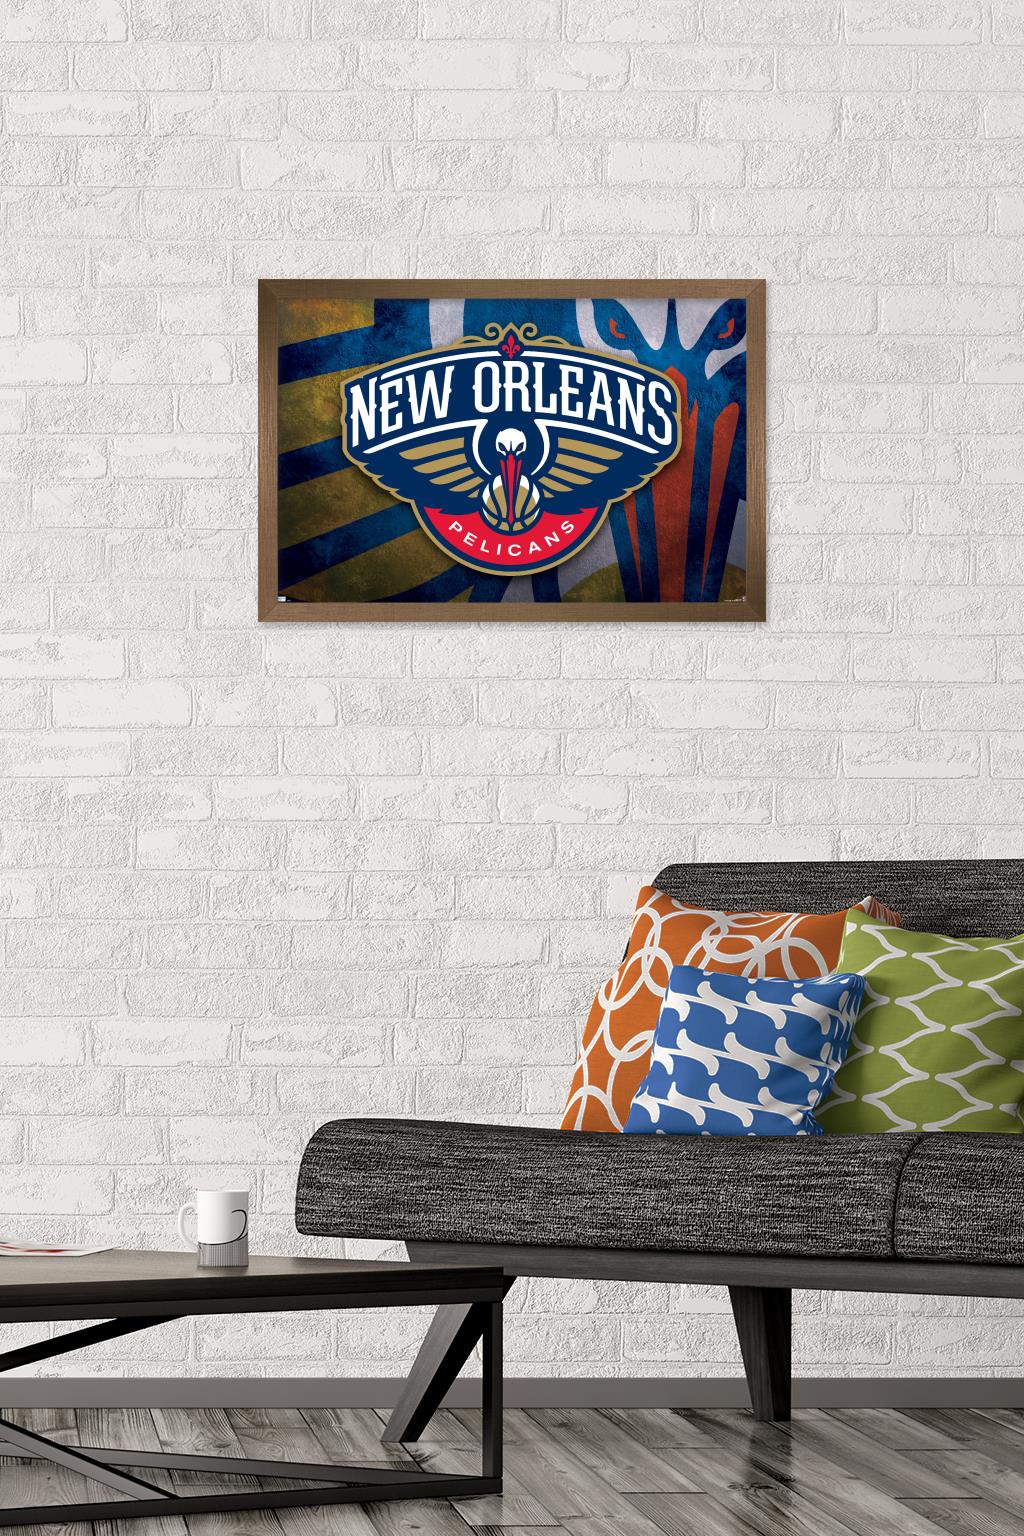 NBA New Orleans Pelicans - Logo 20 Wall Poster, 14.725" x 22.375", Framed - image 2 of 5